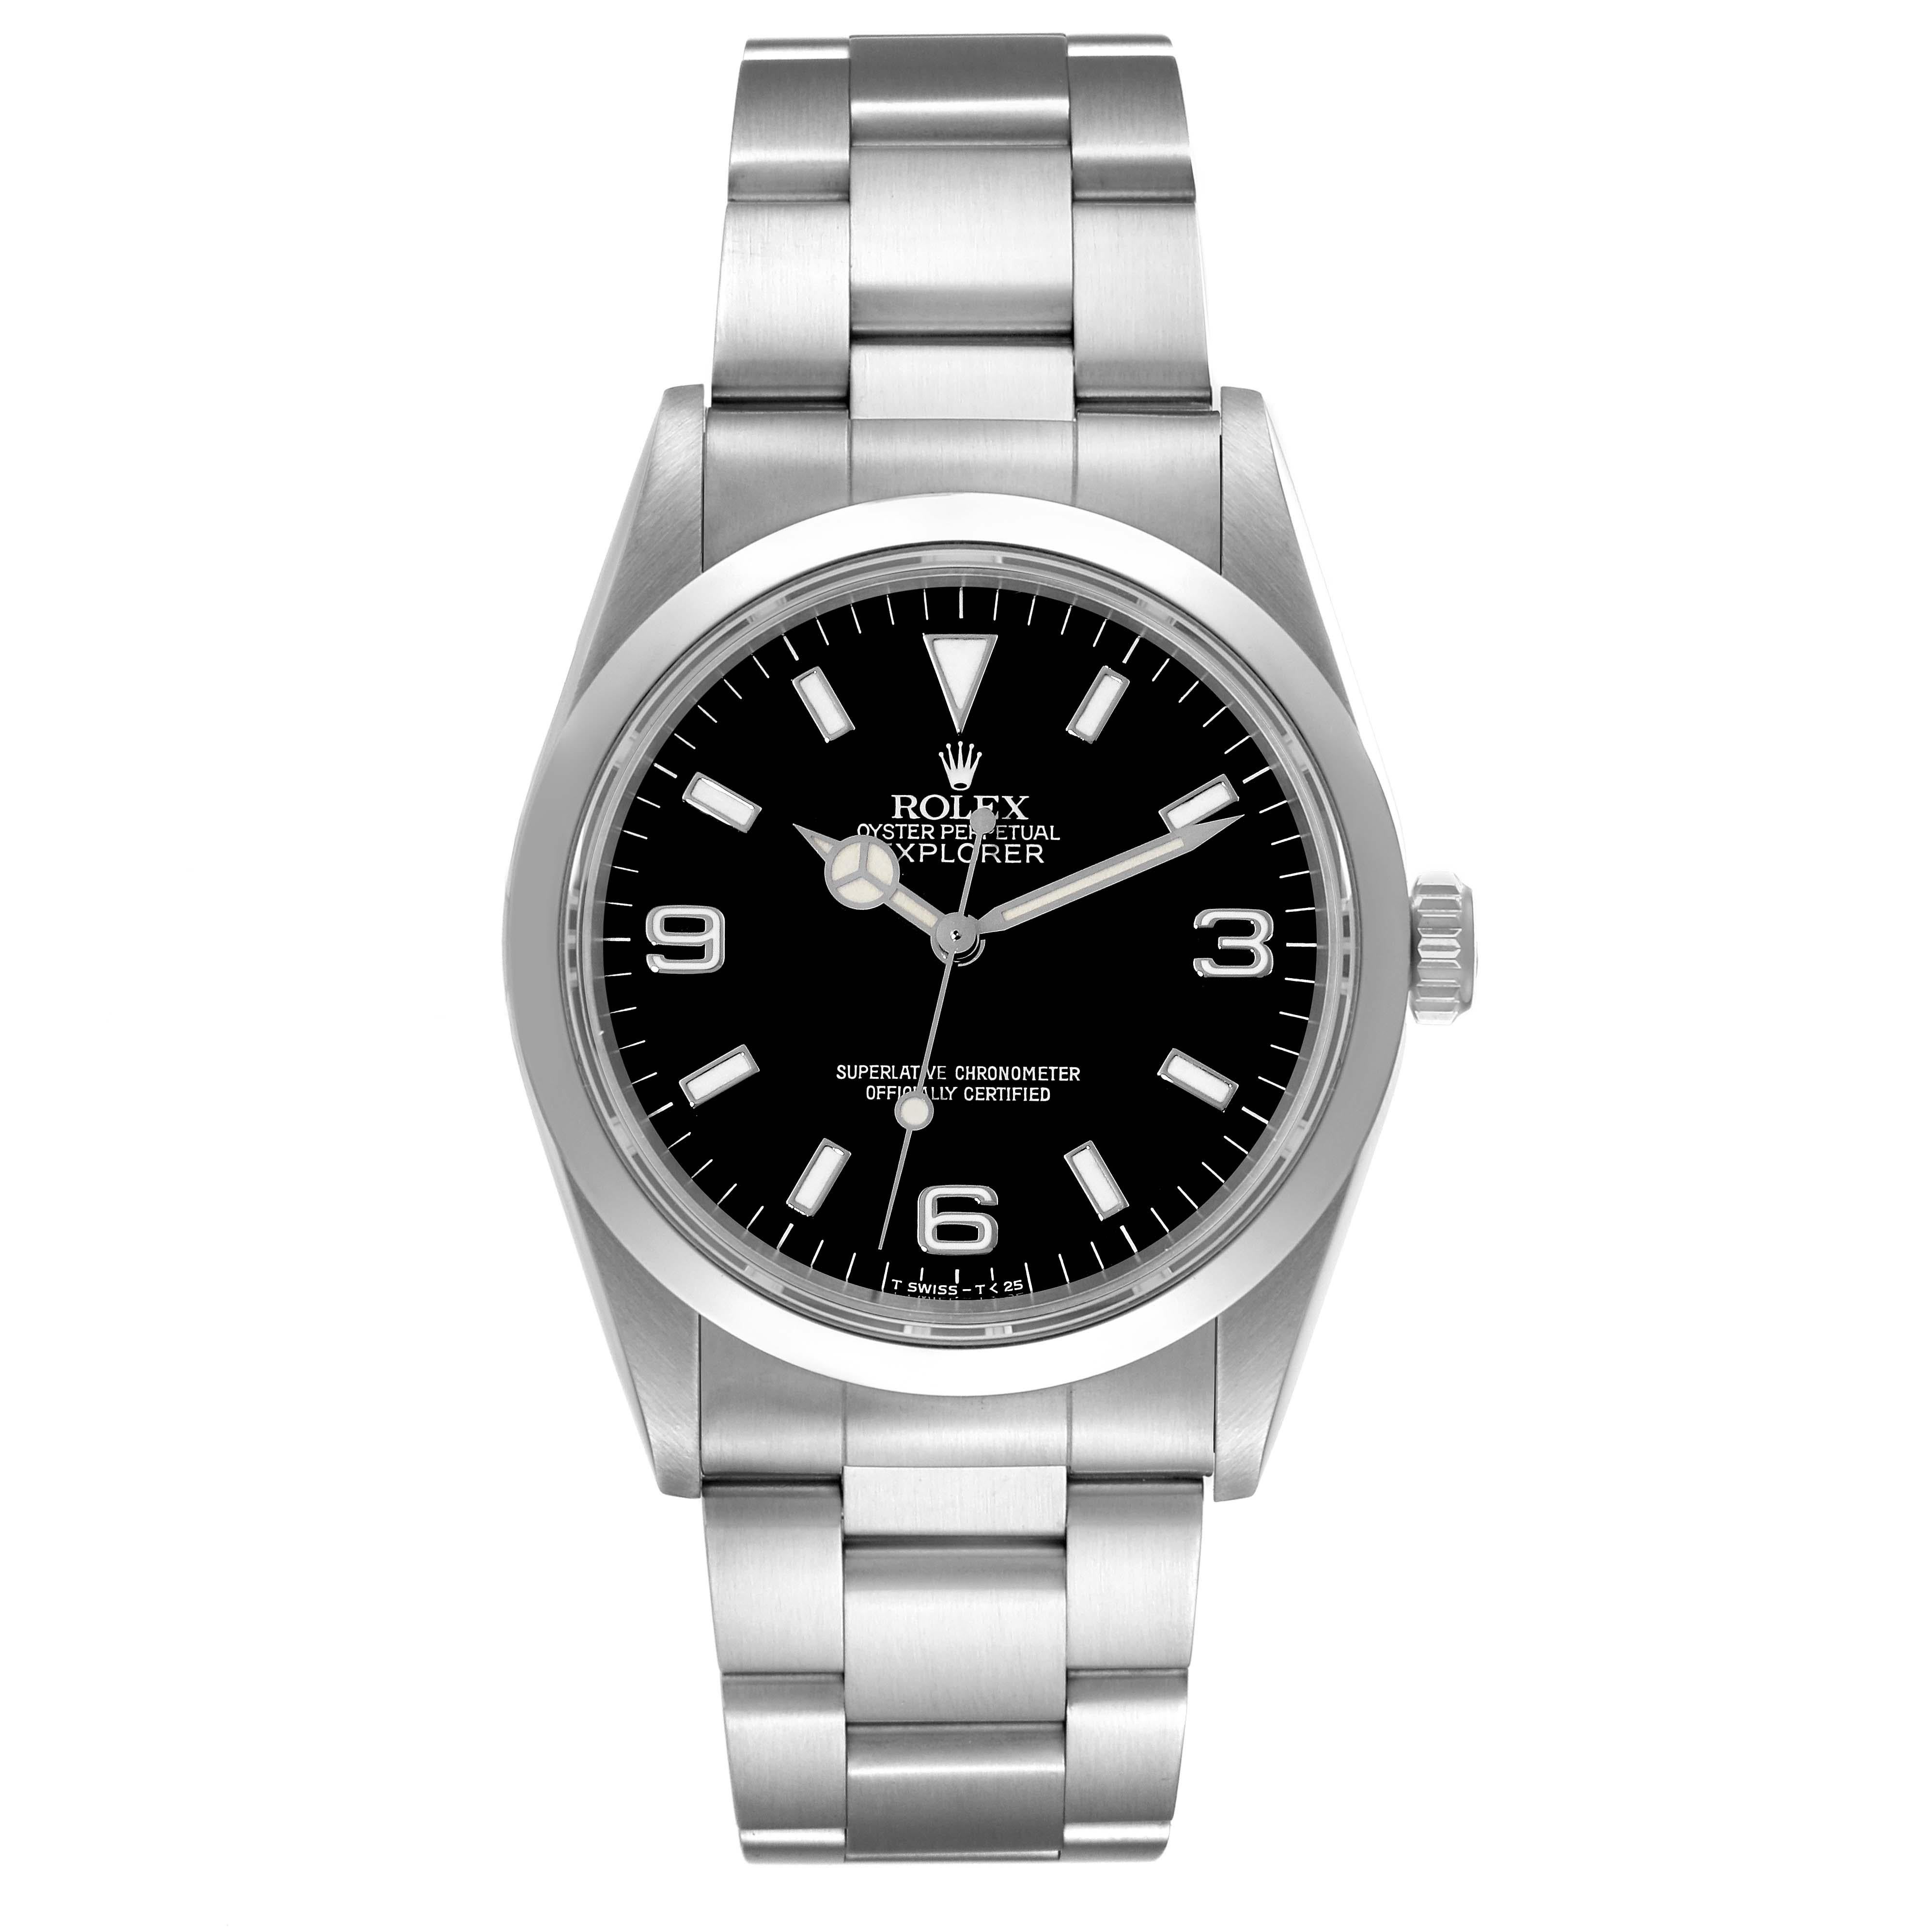 Rolex Explorer I Black Dial Steel Mens Watch 14270 Box Papers. Officially certified chronometer automatic self-winding movement. Stainless steel case 36.0 mm in diameter. Rolex logo on a crown. Stainless steel smooth domed bezel. Scratch resistant